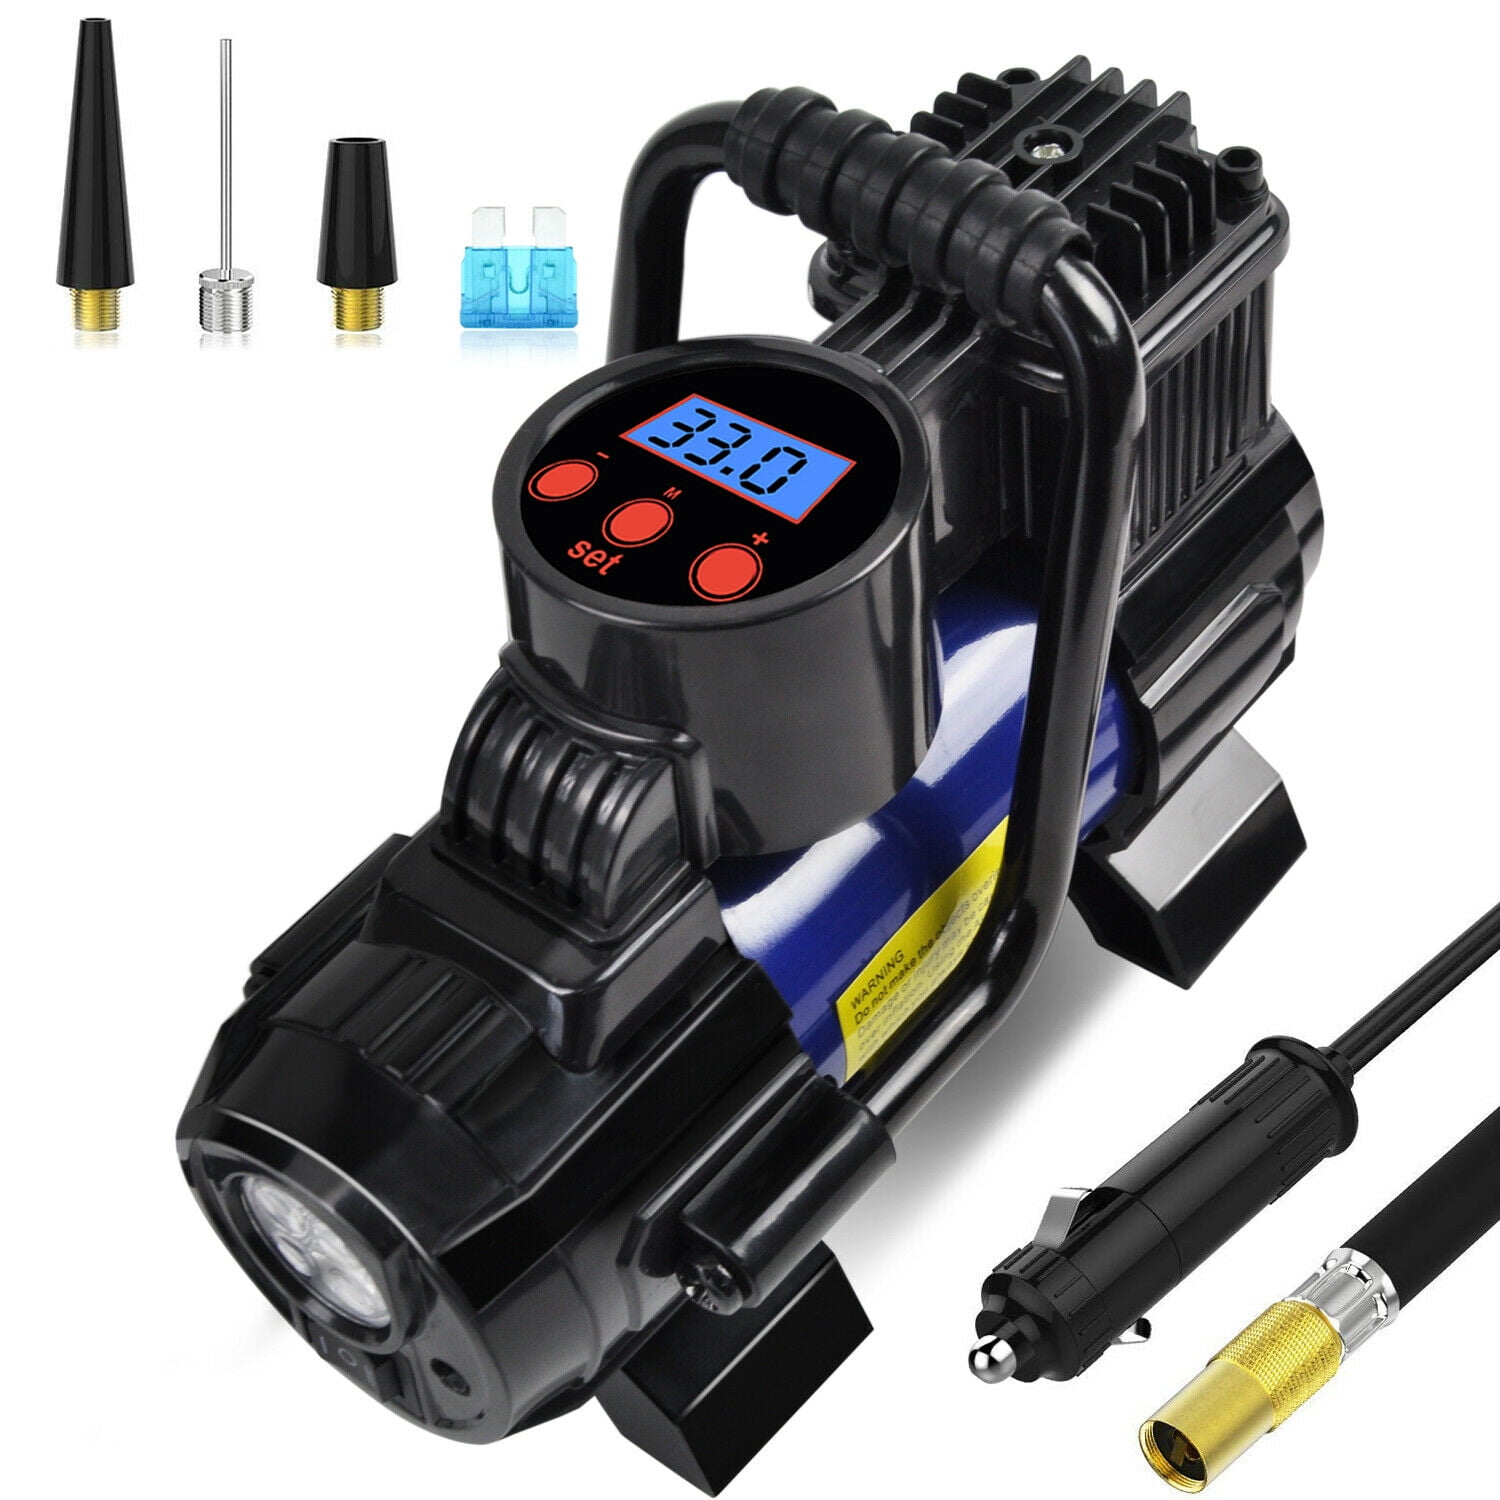 Details about   Tire Inflator Car Air Pump Compressor Electric Heavy Duty Portable Auto 12v 150p 